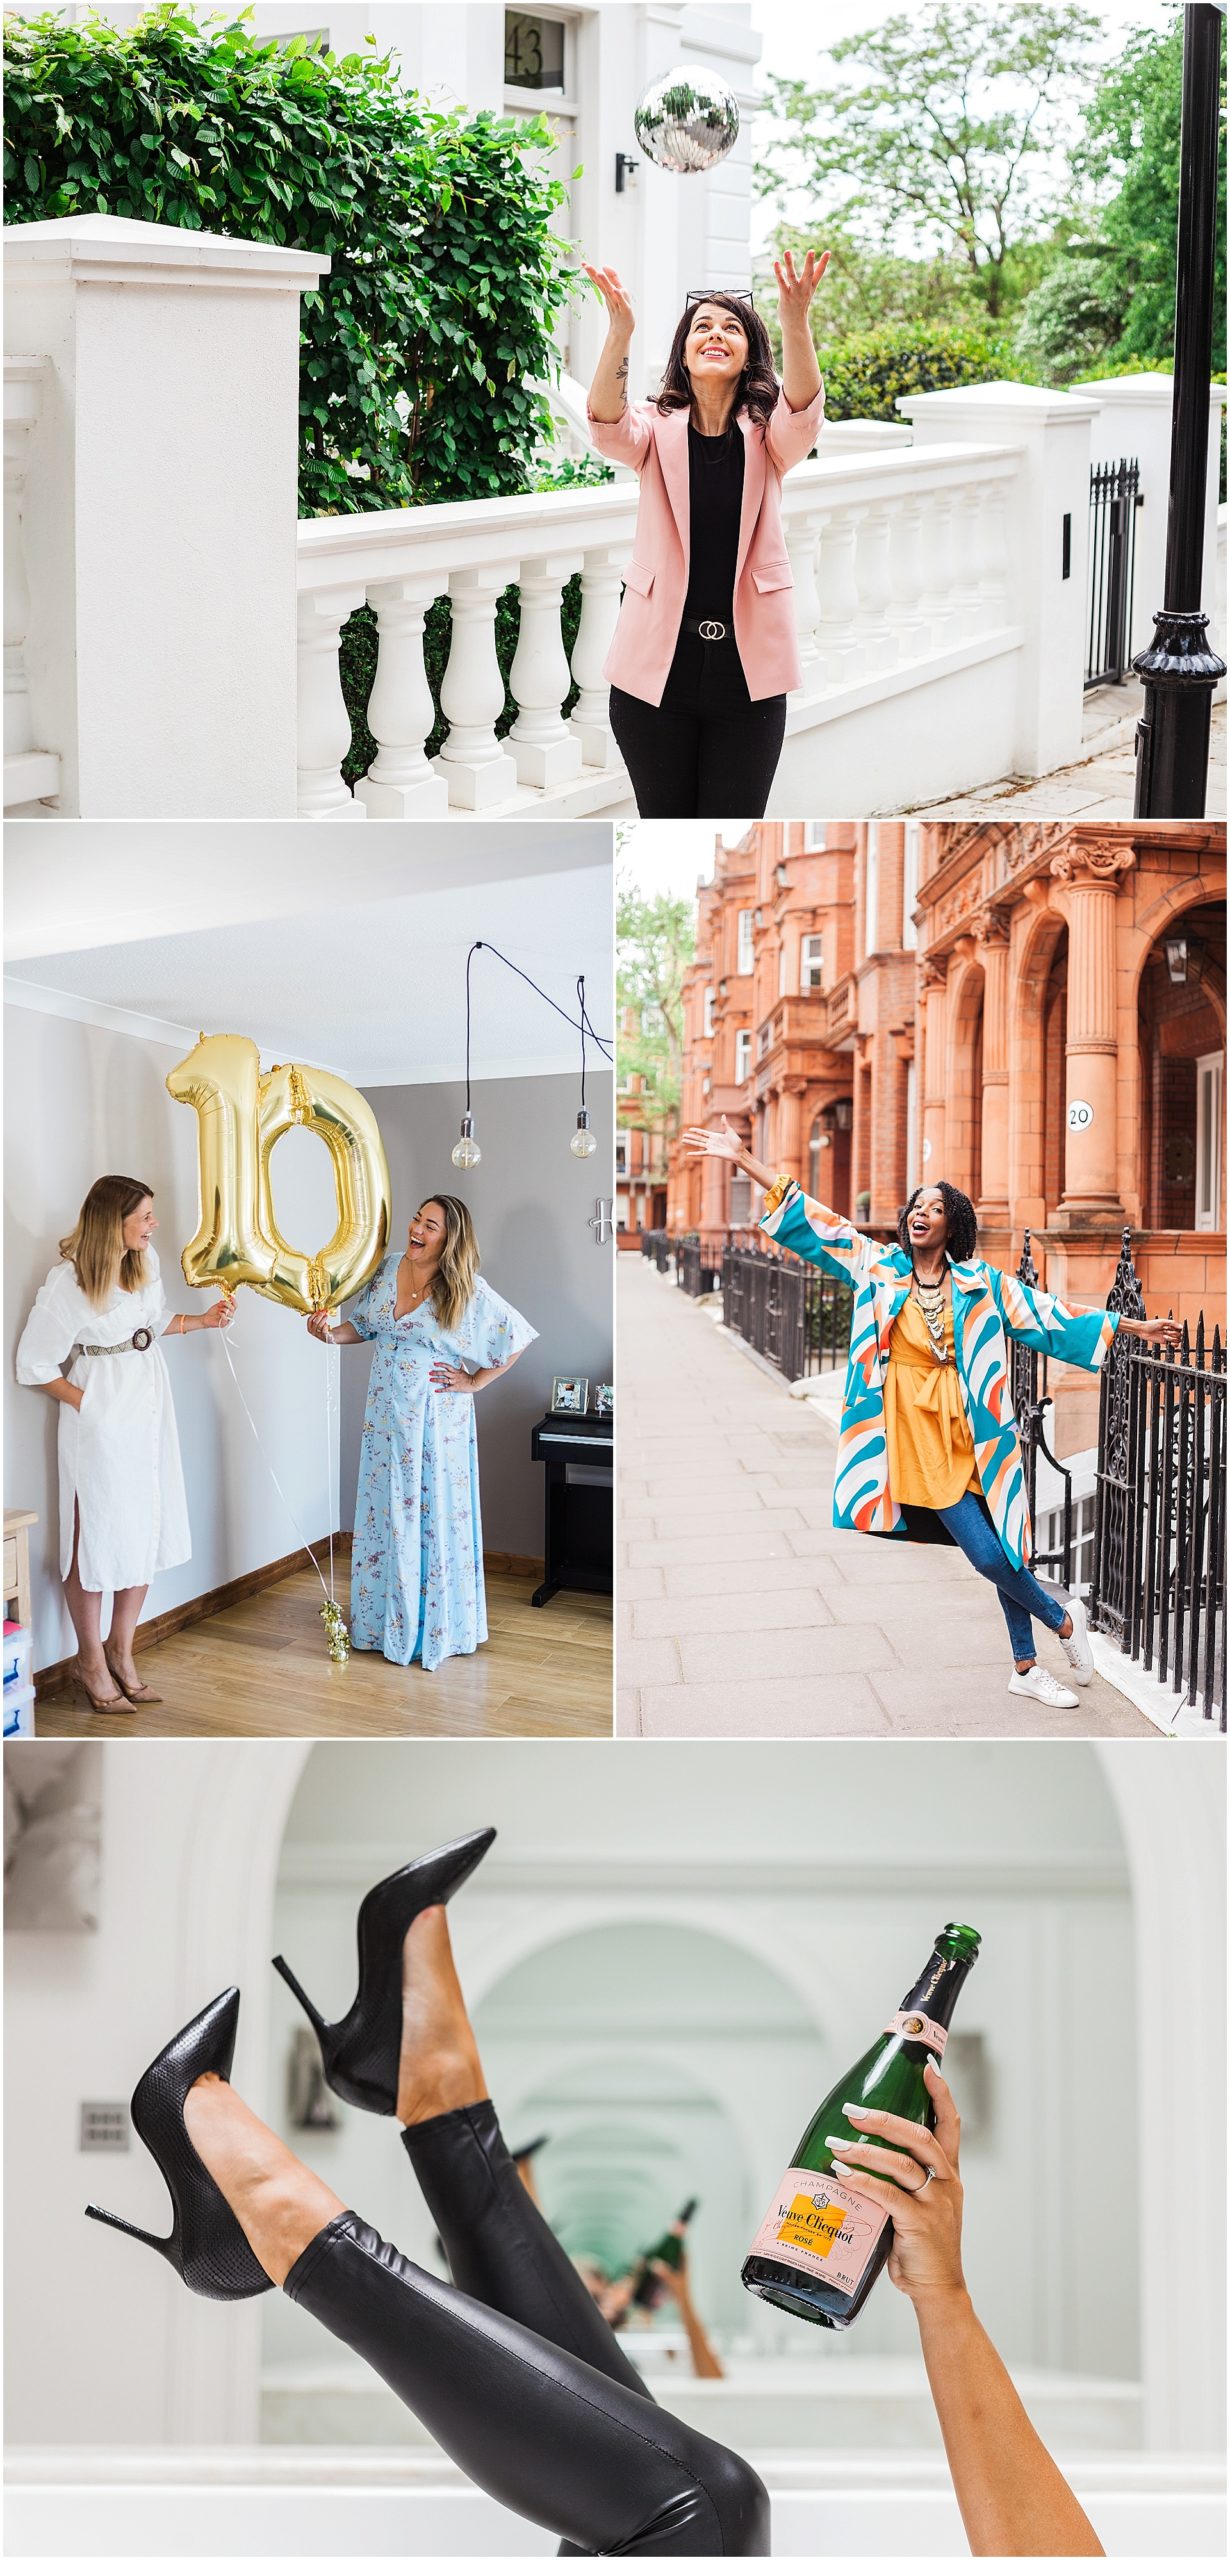 Ways to show business celebrations in your brand images. Images by London brand photographer AKP Branding Stories